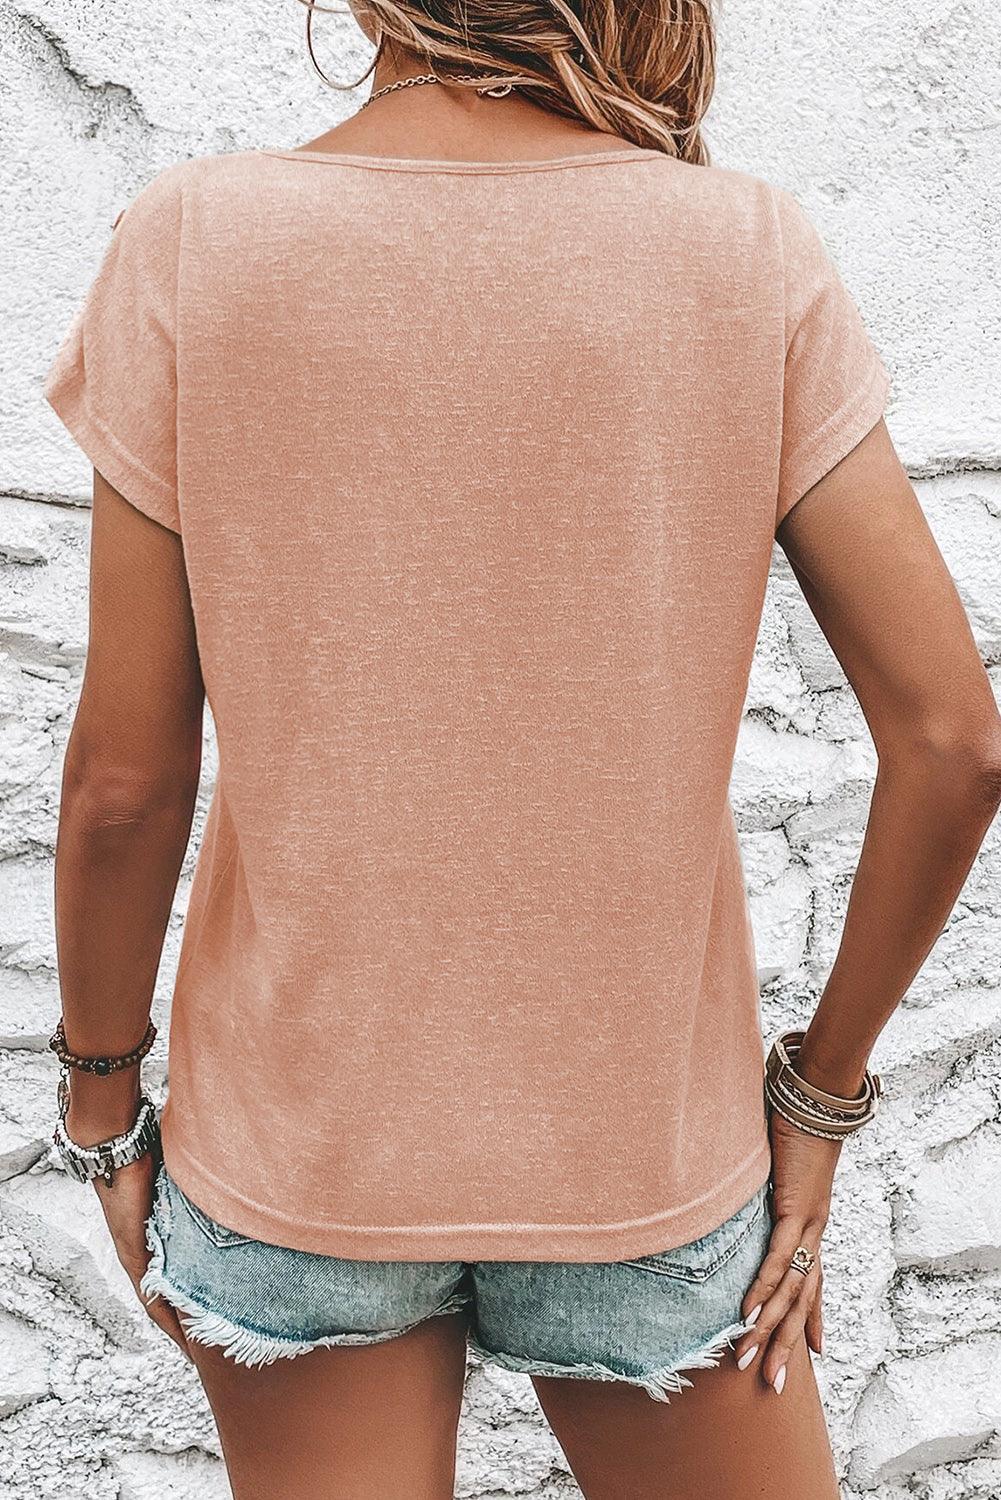 Apricot Pink Solid Color Button Decor Batwing Sleeve Tee - Ninonine